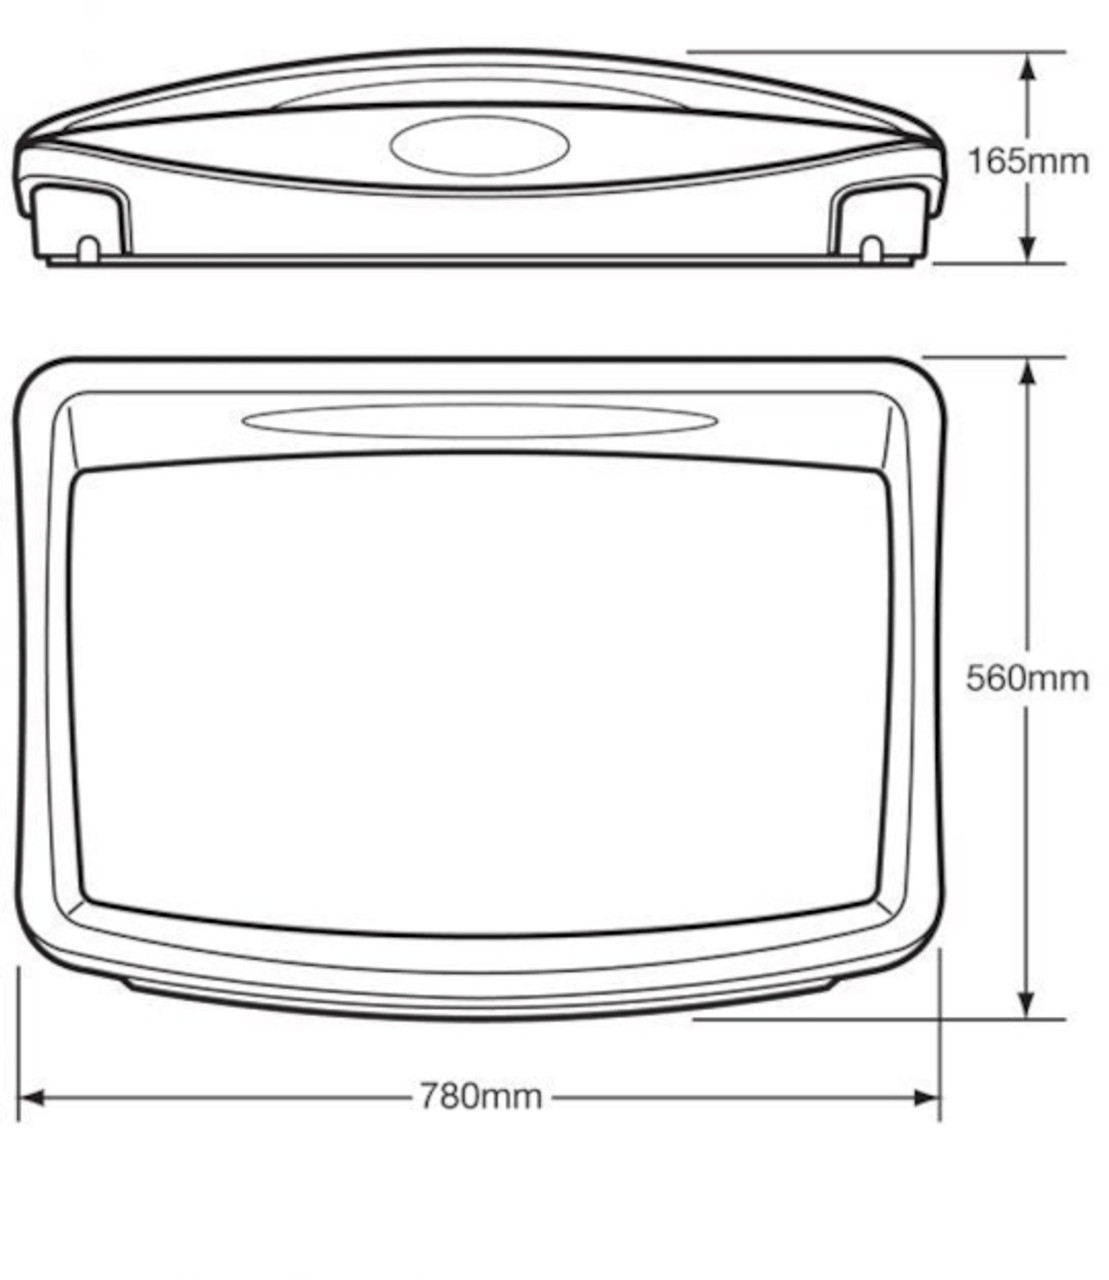 MT80WHT - Technical drawing of countertop baby changing unit